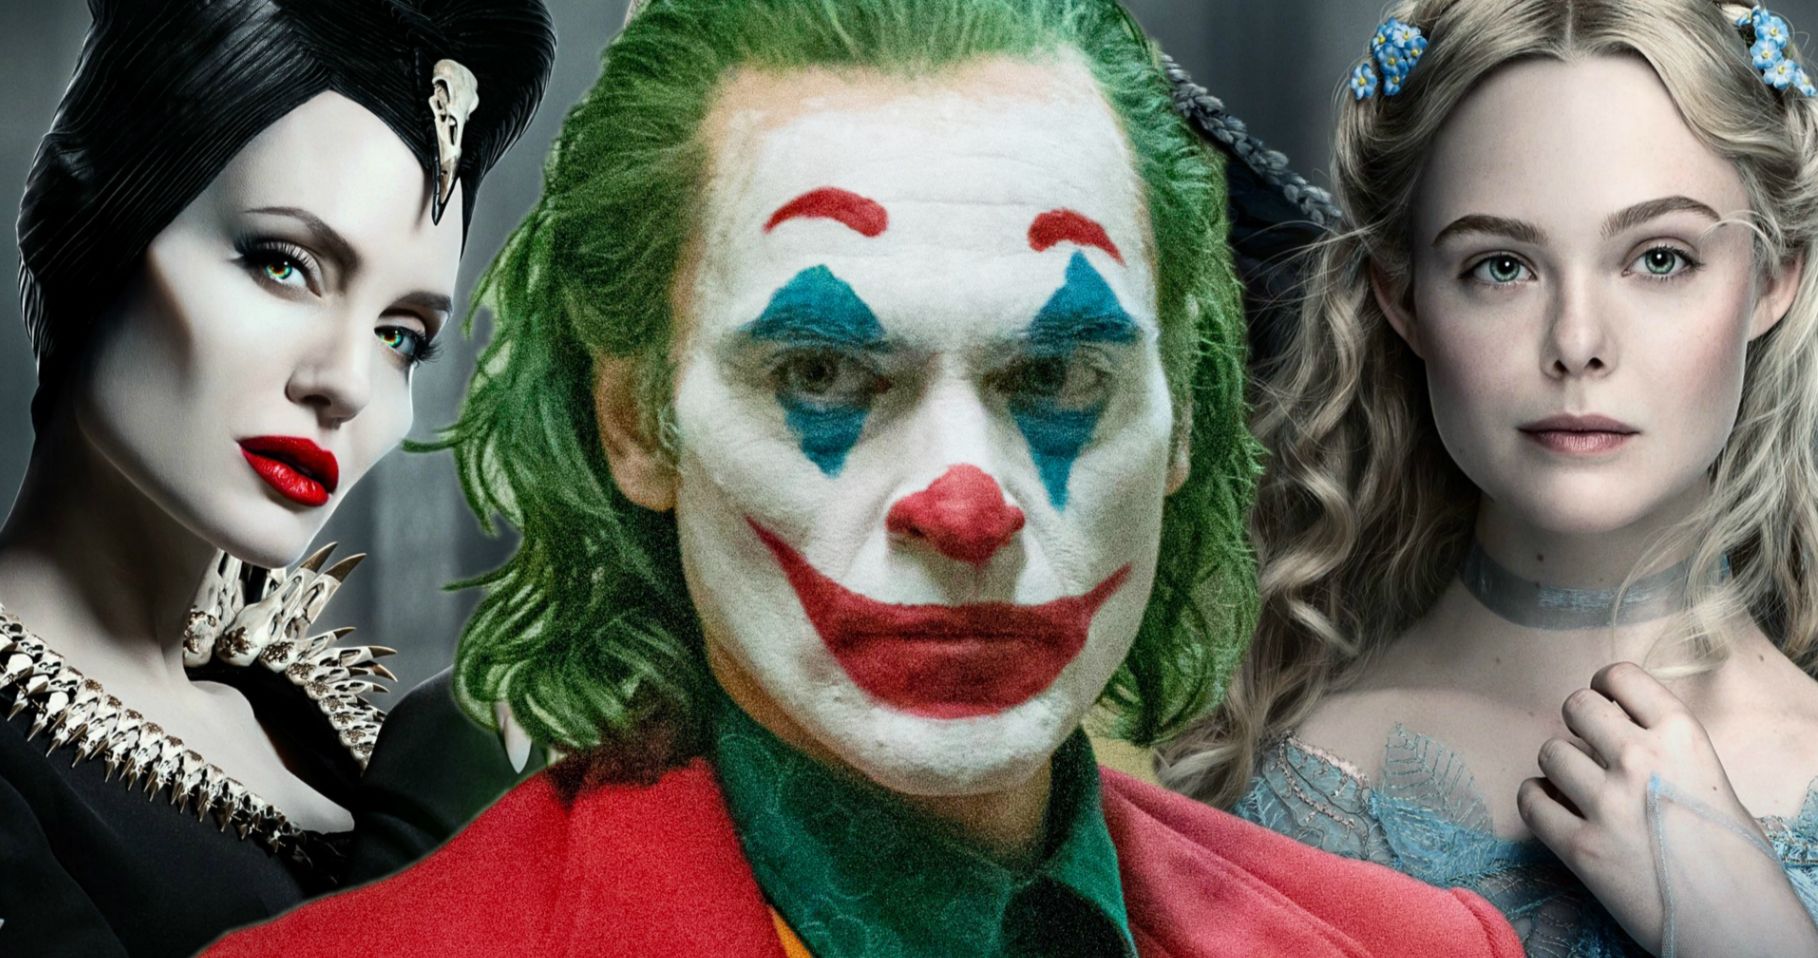 Joker Steals Weekend Box Office Back from Maleficent with $18.9M